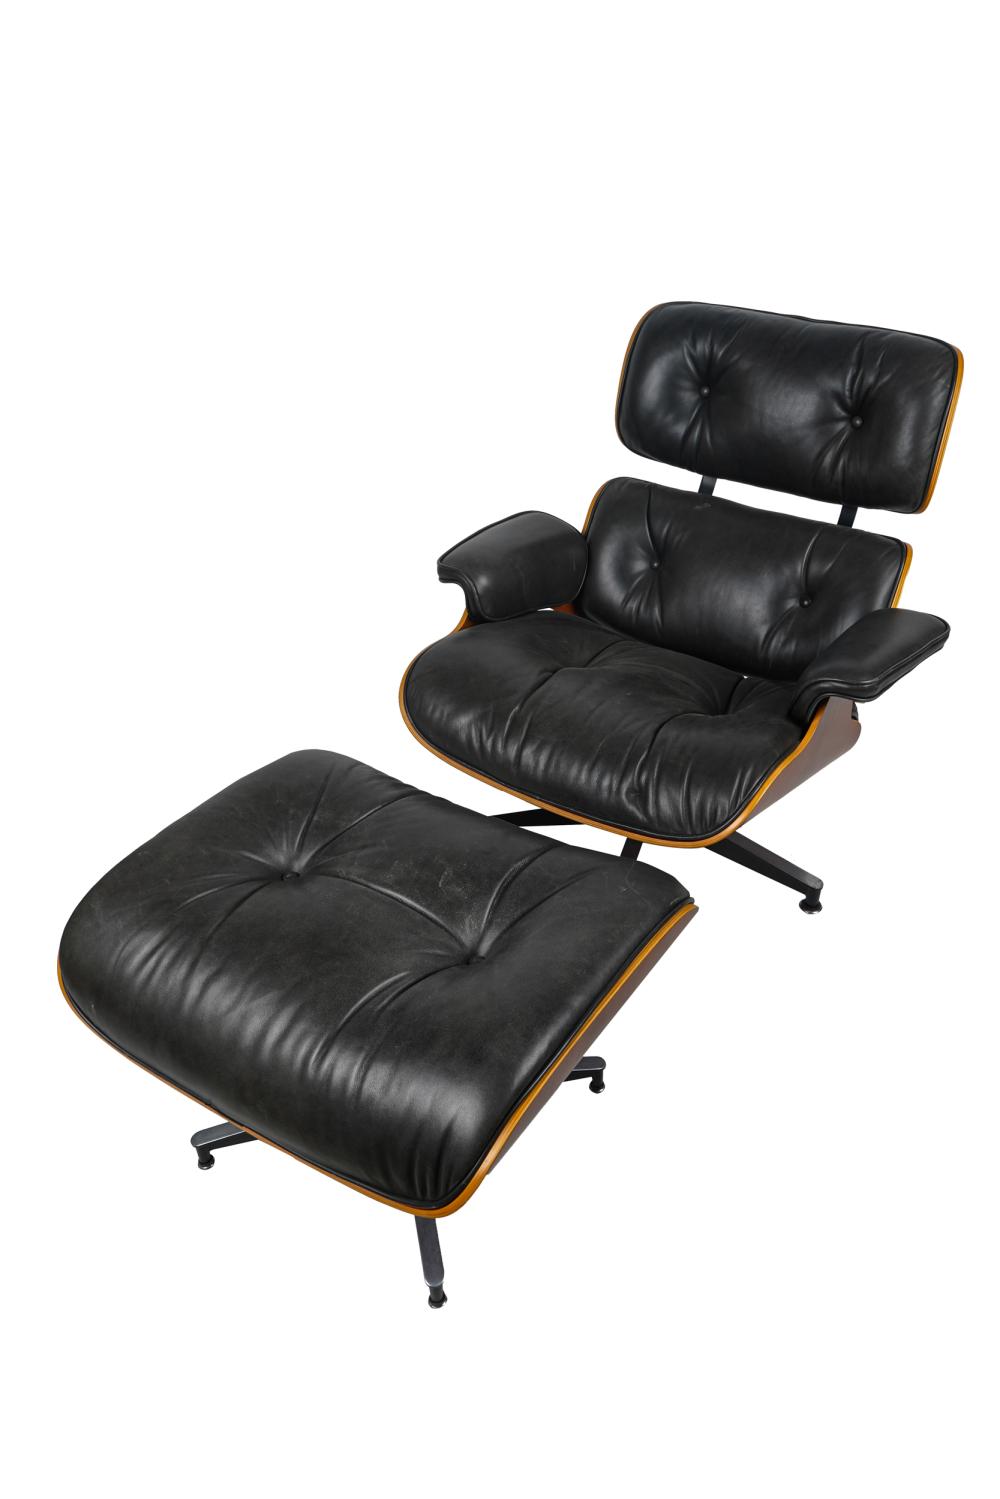 CHARLES RAY EAMES LOUNGE CHAIR 3373a6